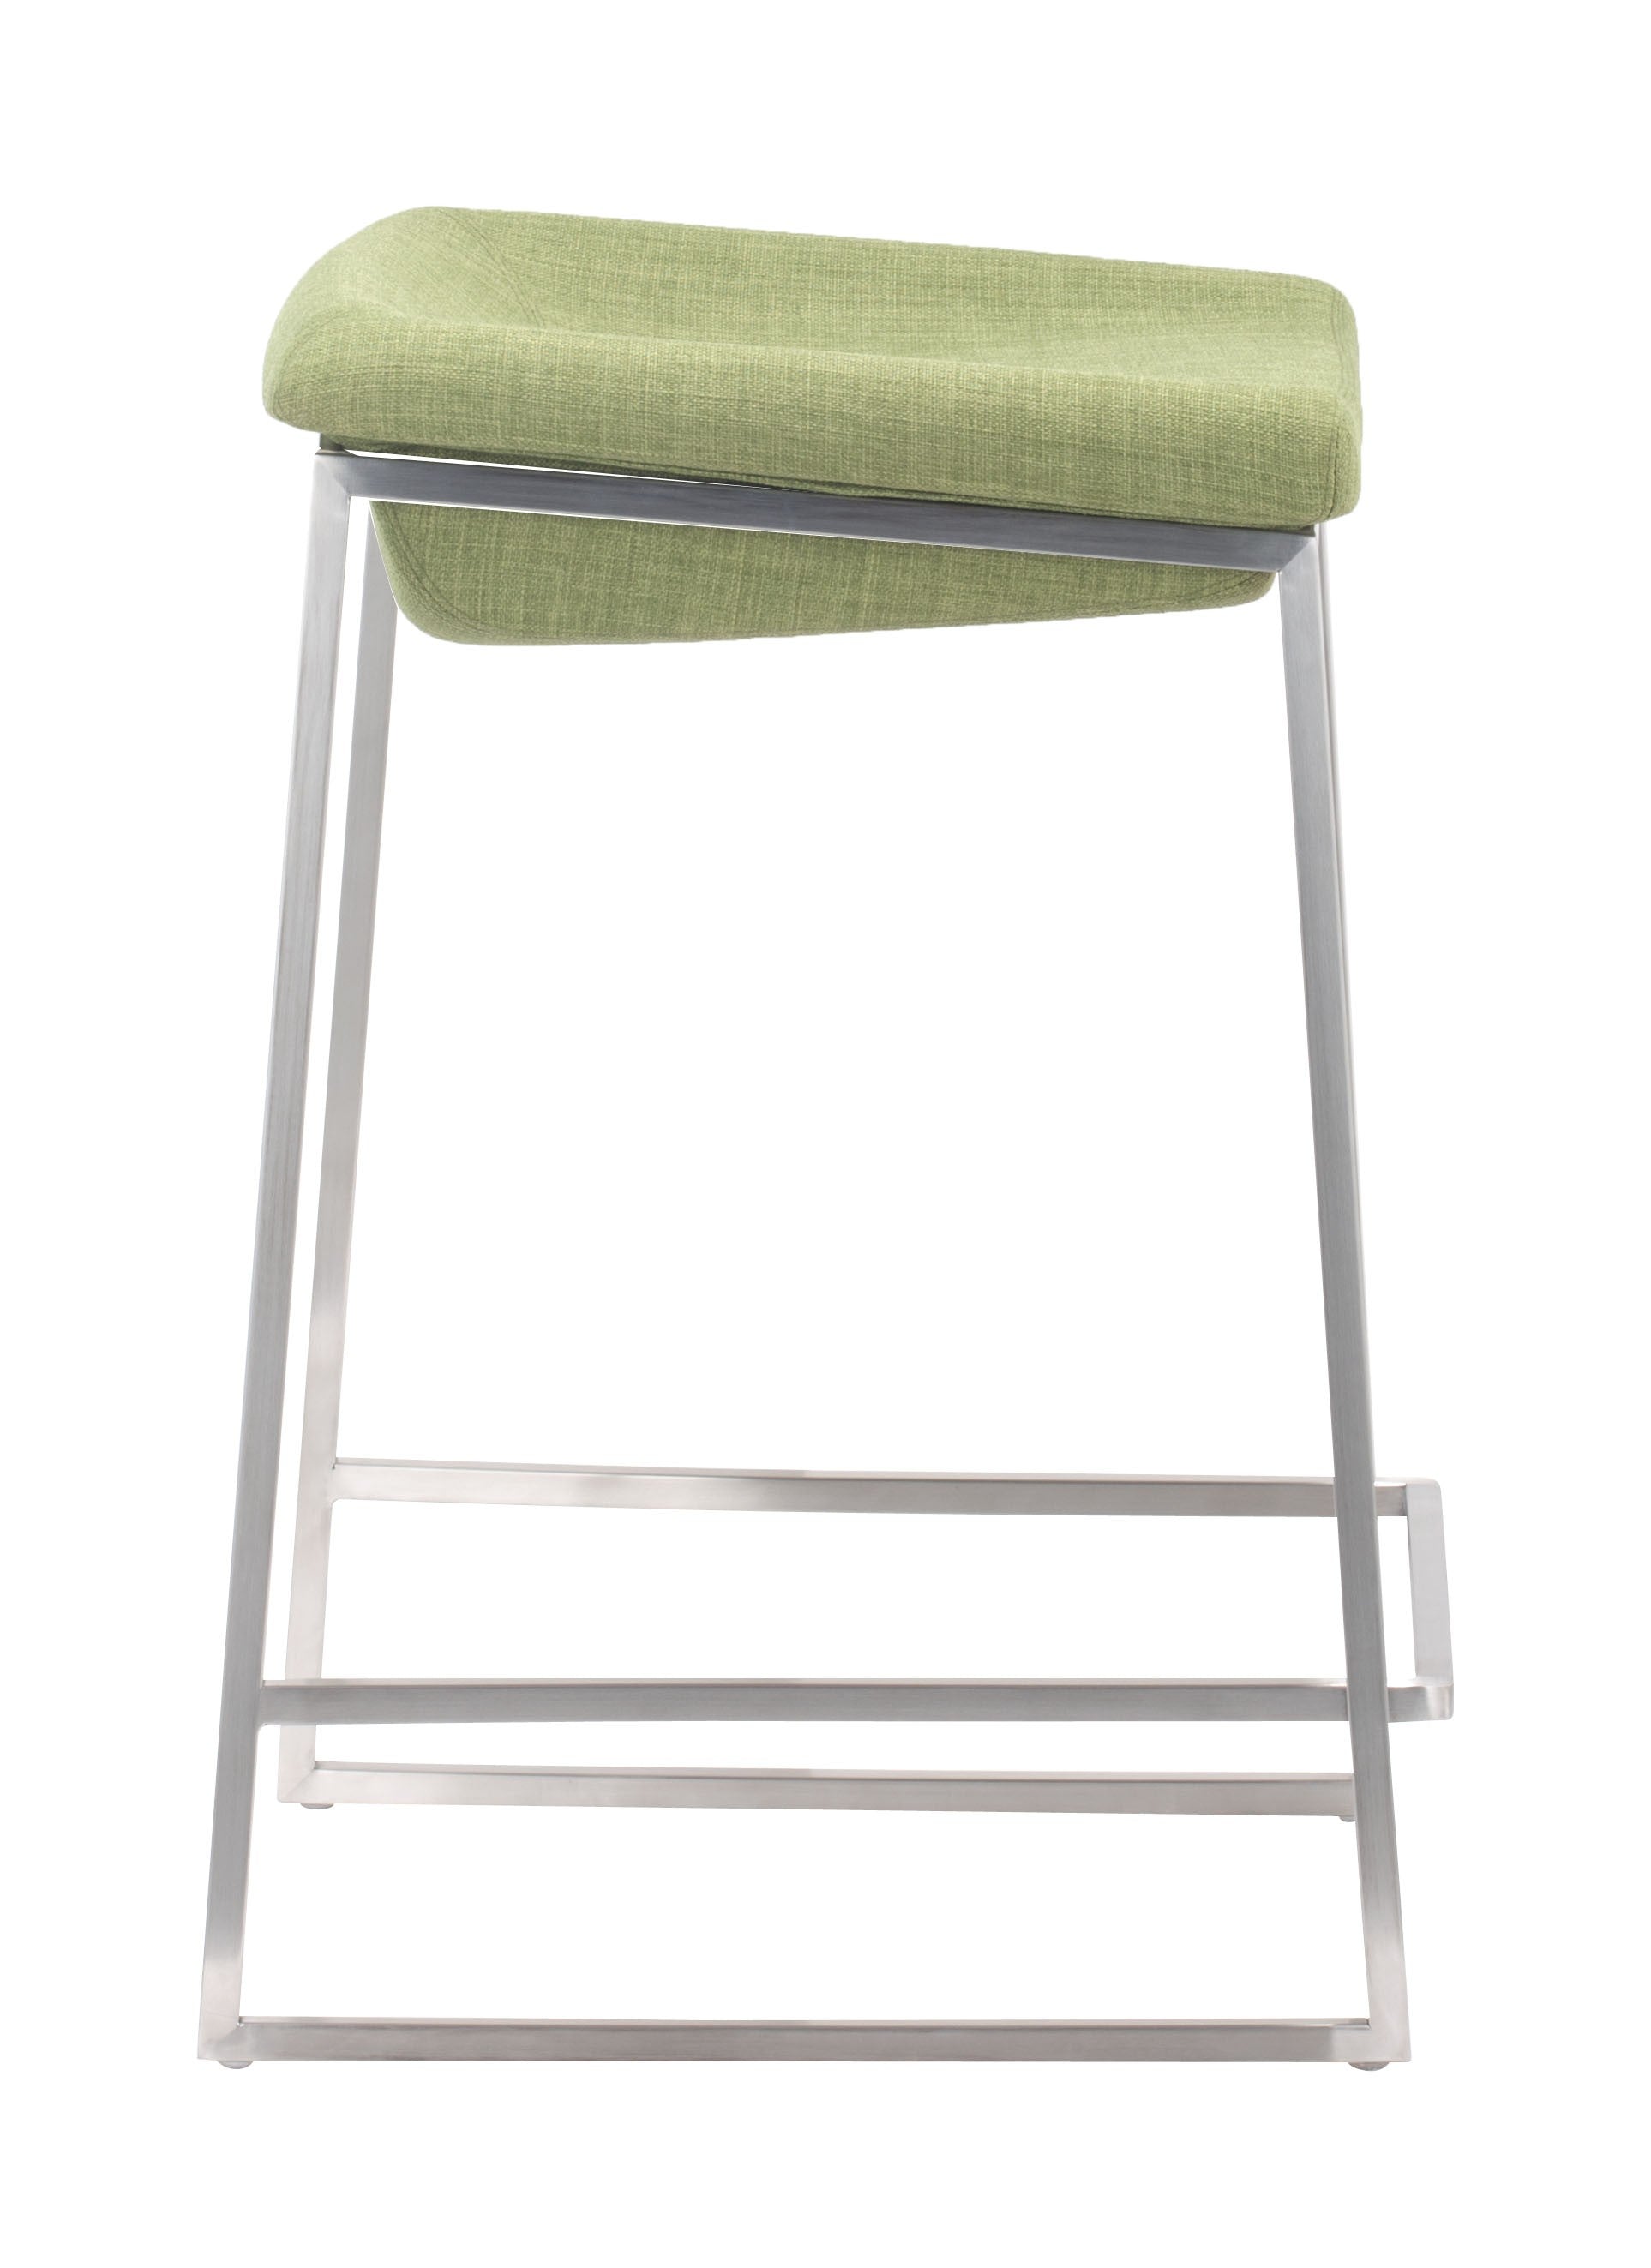 Set of Two 24" Green And Silver Steel Backless Counter Height Bar Chairs